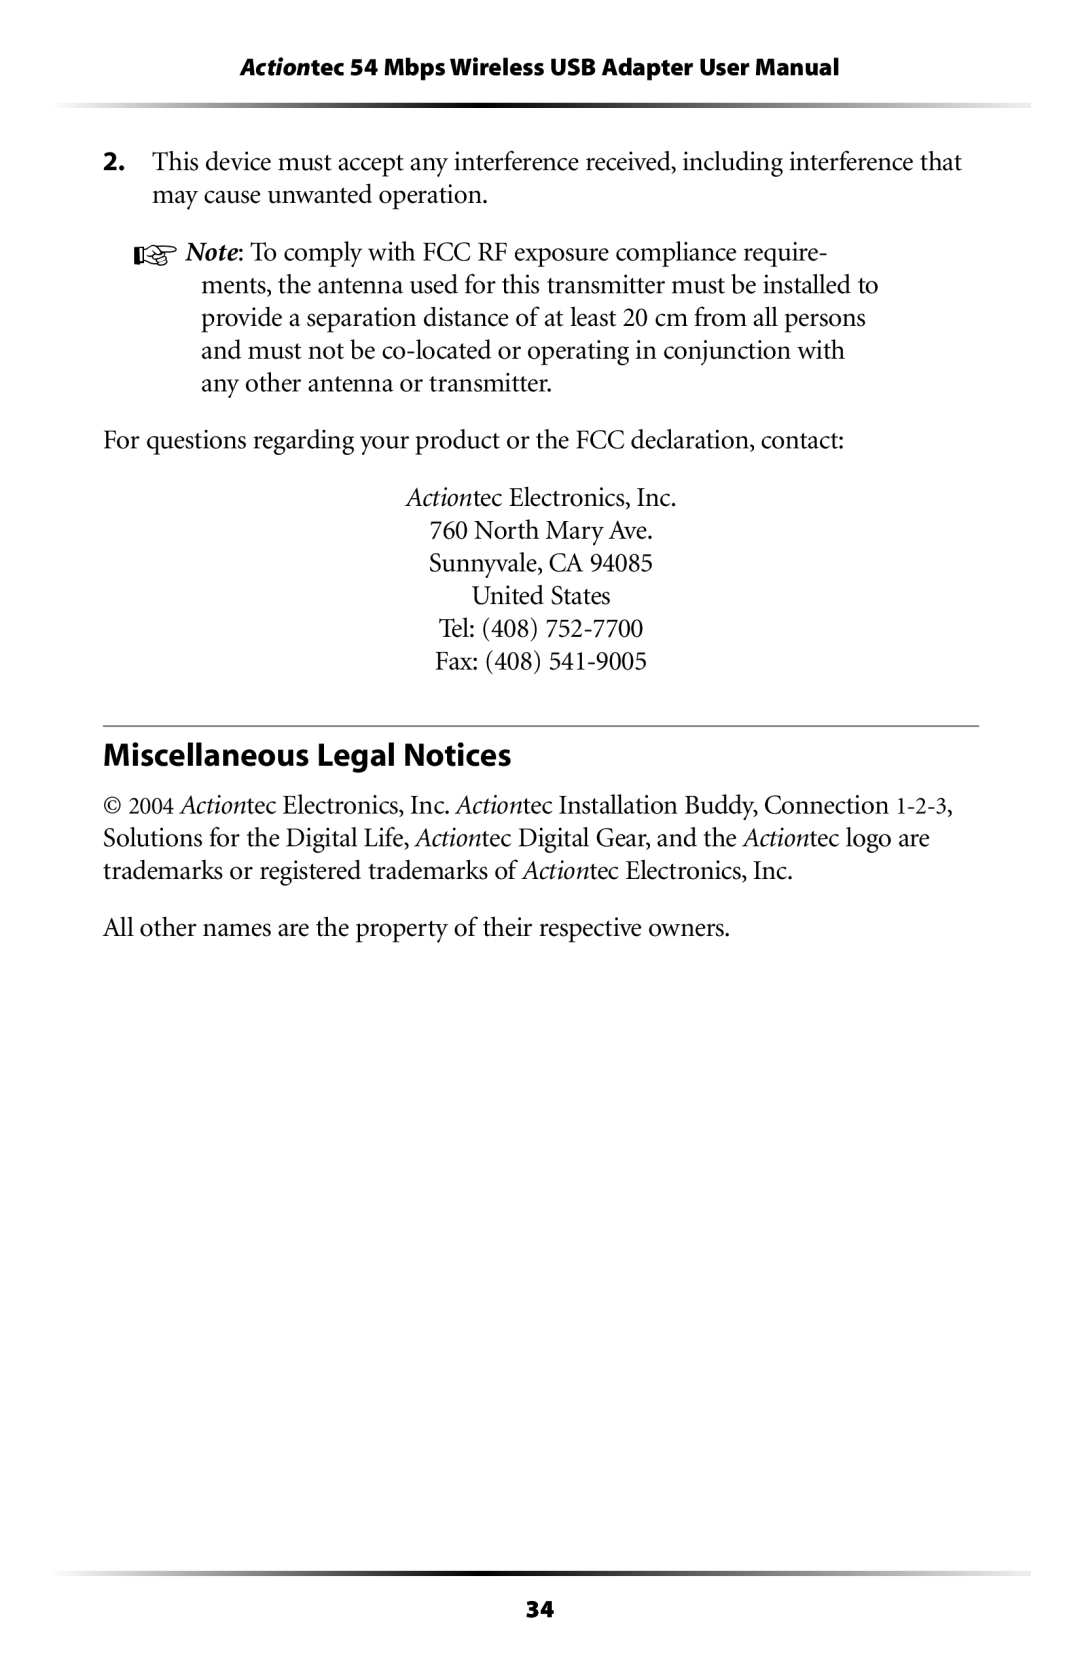 Actiontec electronic 802UIG user manual Miscellaneous Legal Notices 